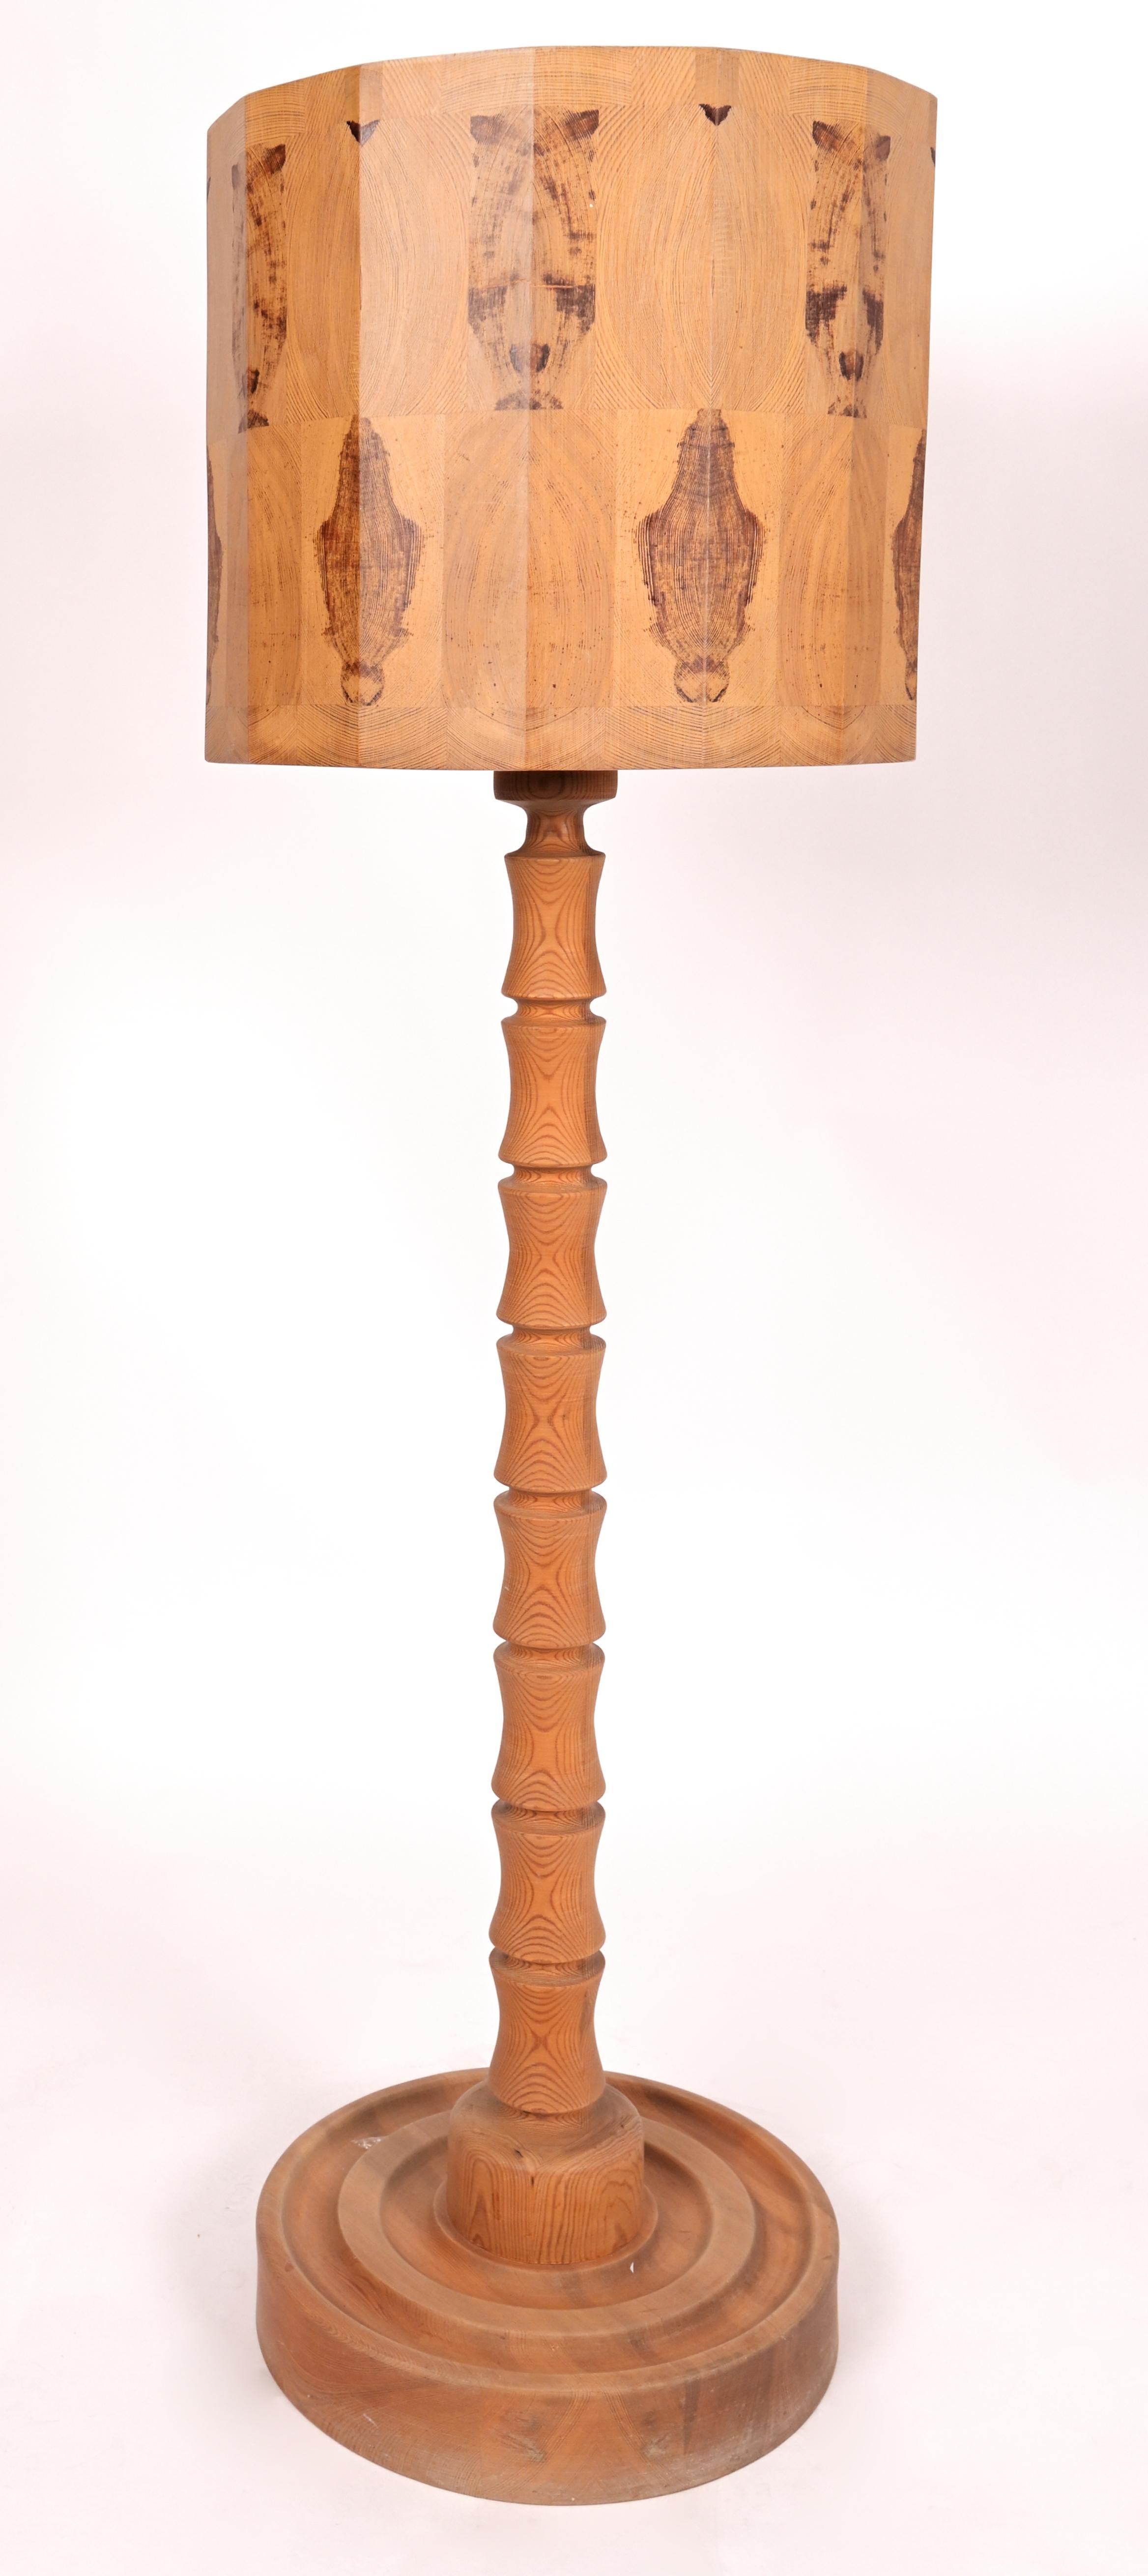 A pair of Intricate Hand Carved pine wood lamps with marbled ribbed stands and decorated shades. Each unique shade has 14 cross sections of veneer configured vase and oval shaped patterns. The lamps have fitted pine diffusers with round holes for